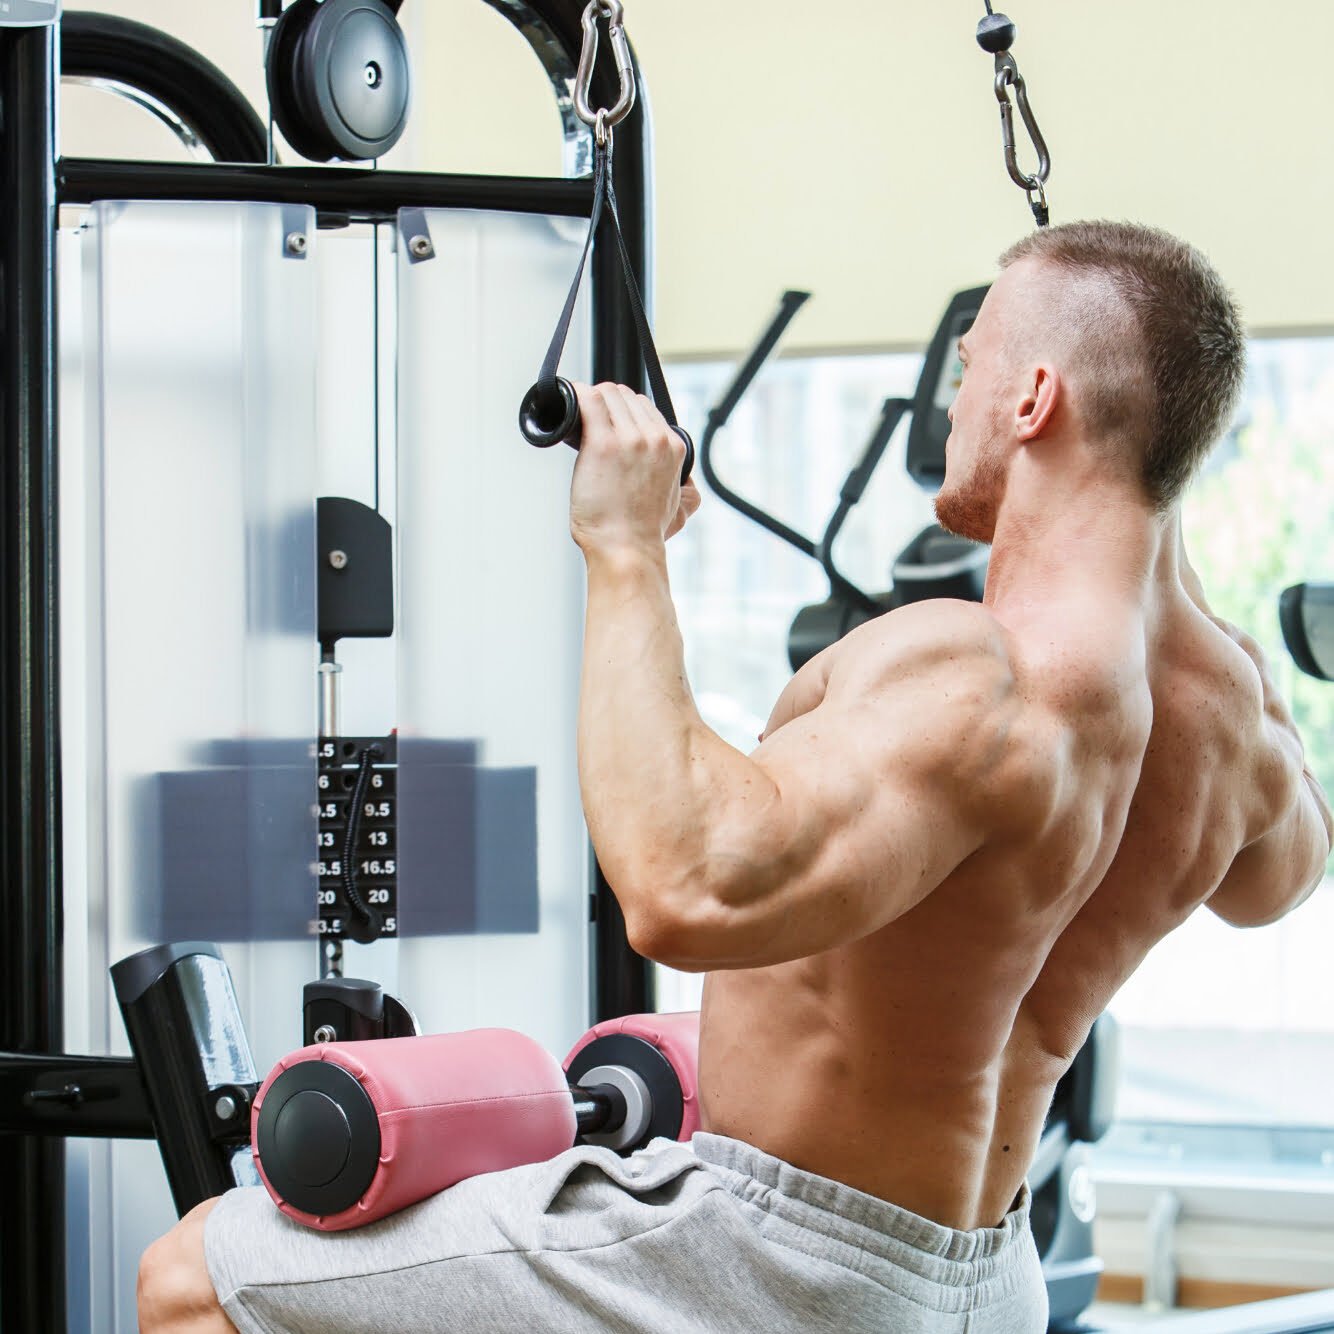 10 Lat Pulldown Machine Exercises To Build Muscle And Strength